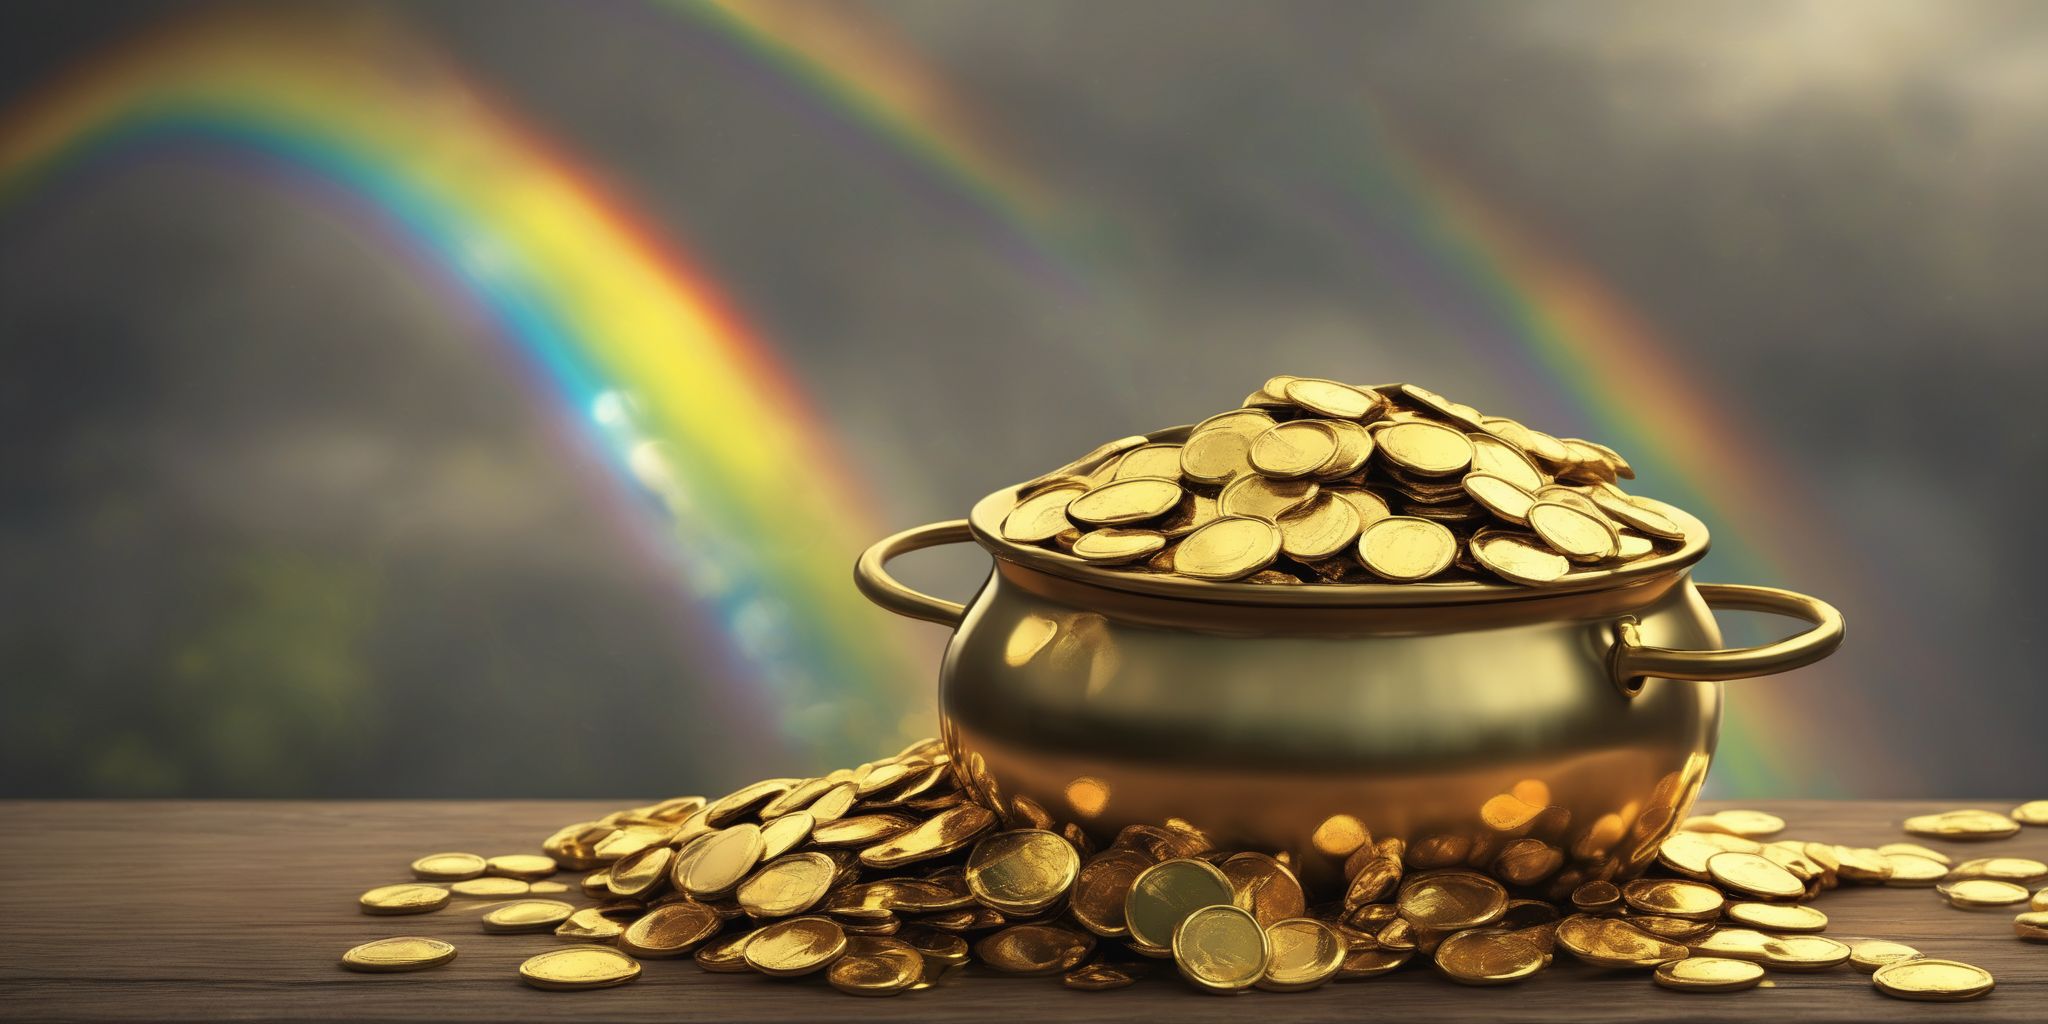 Pot of gold  in realistic, photographic style